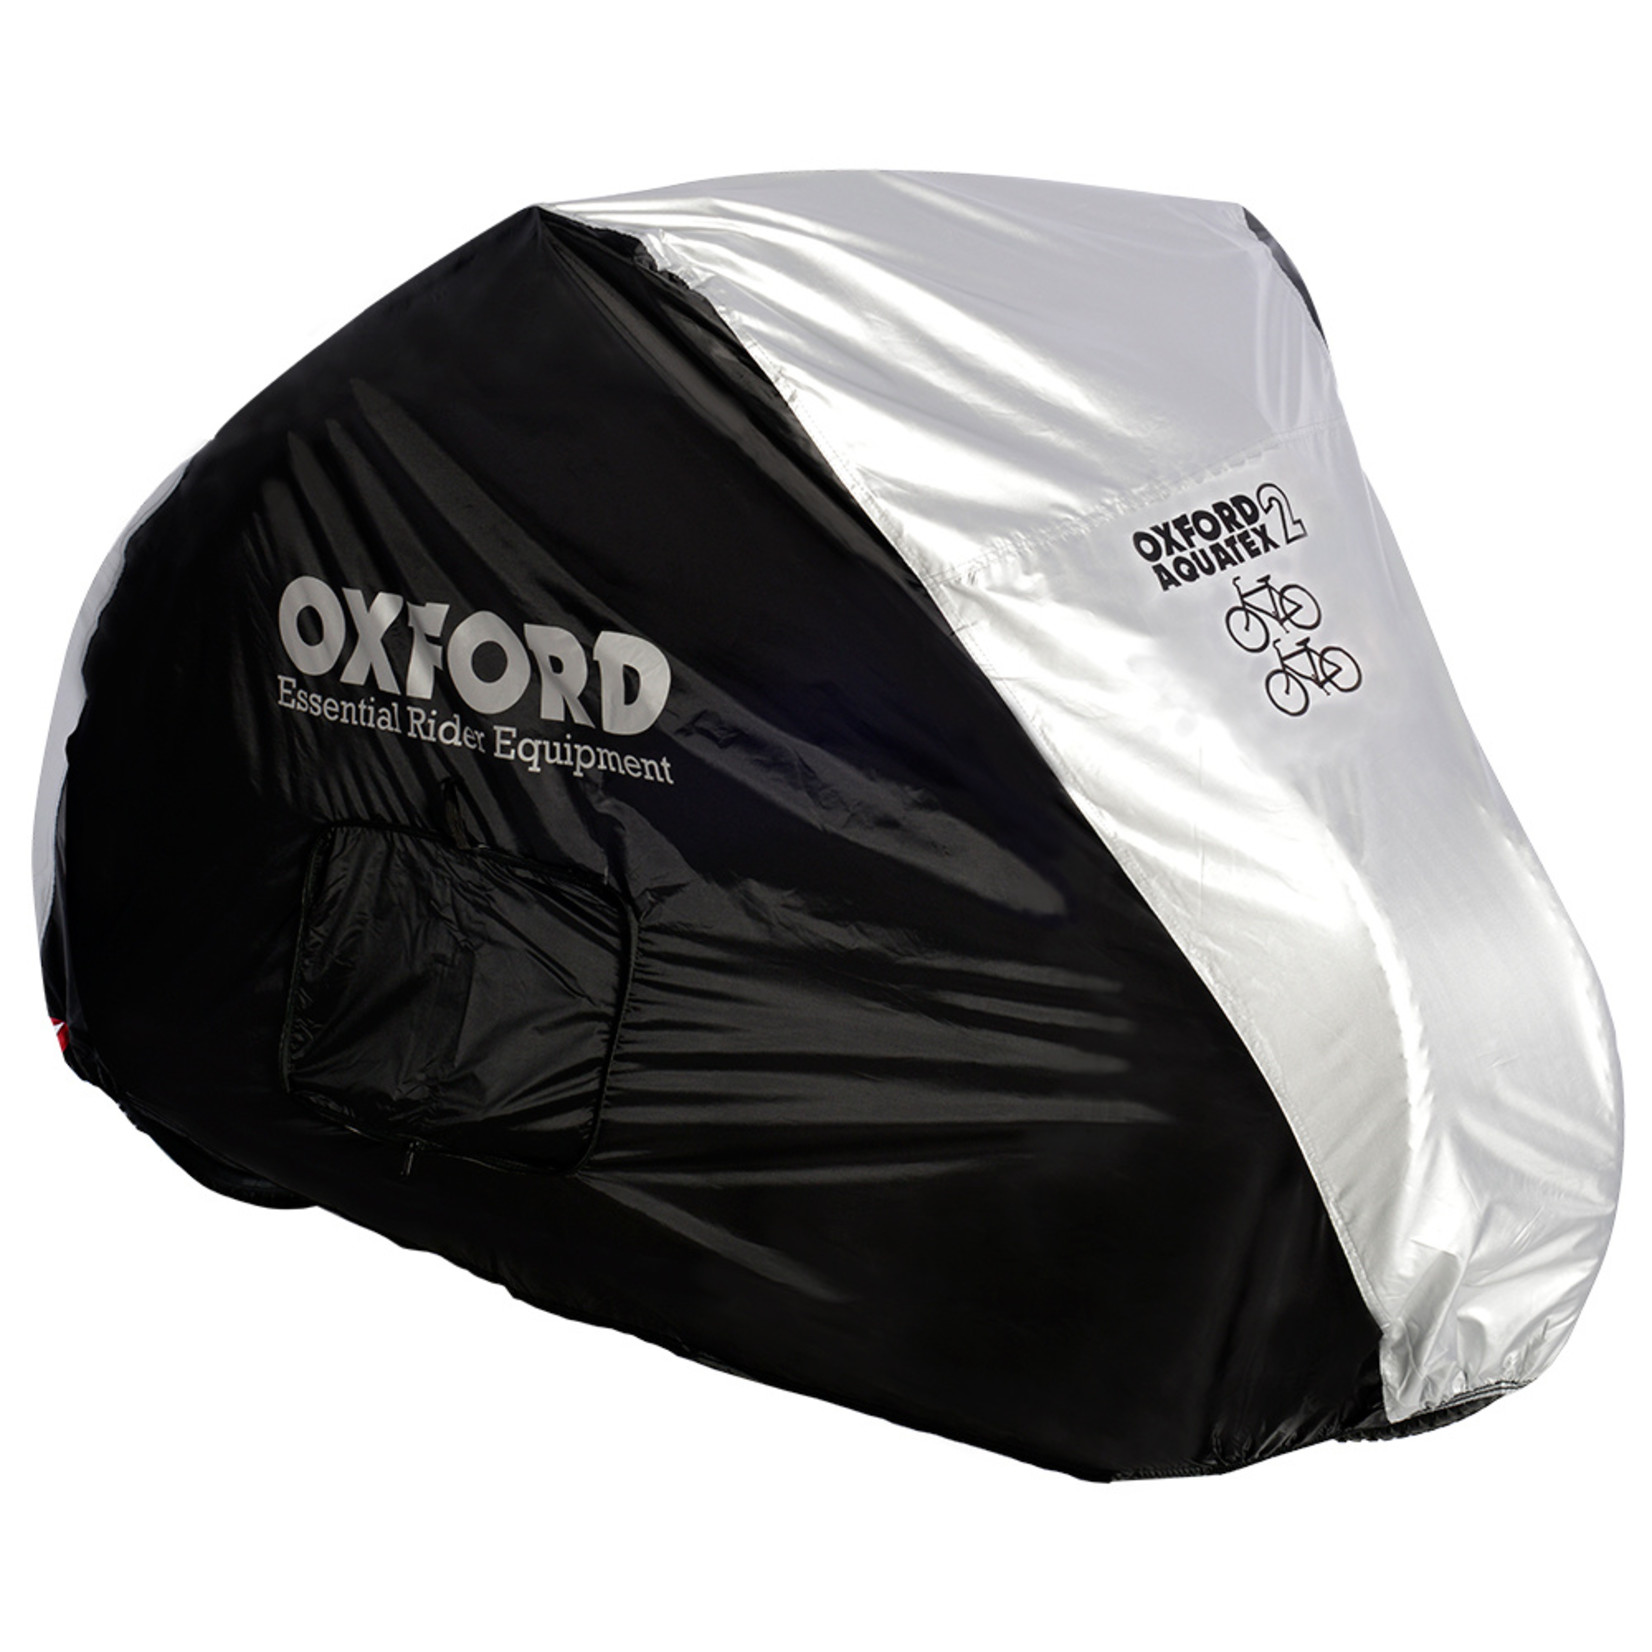 Oxford Oxford Aquatex Double Bicycle Cover